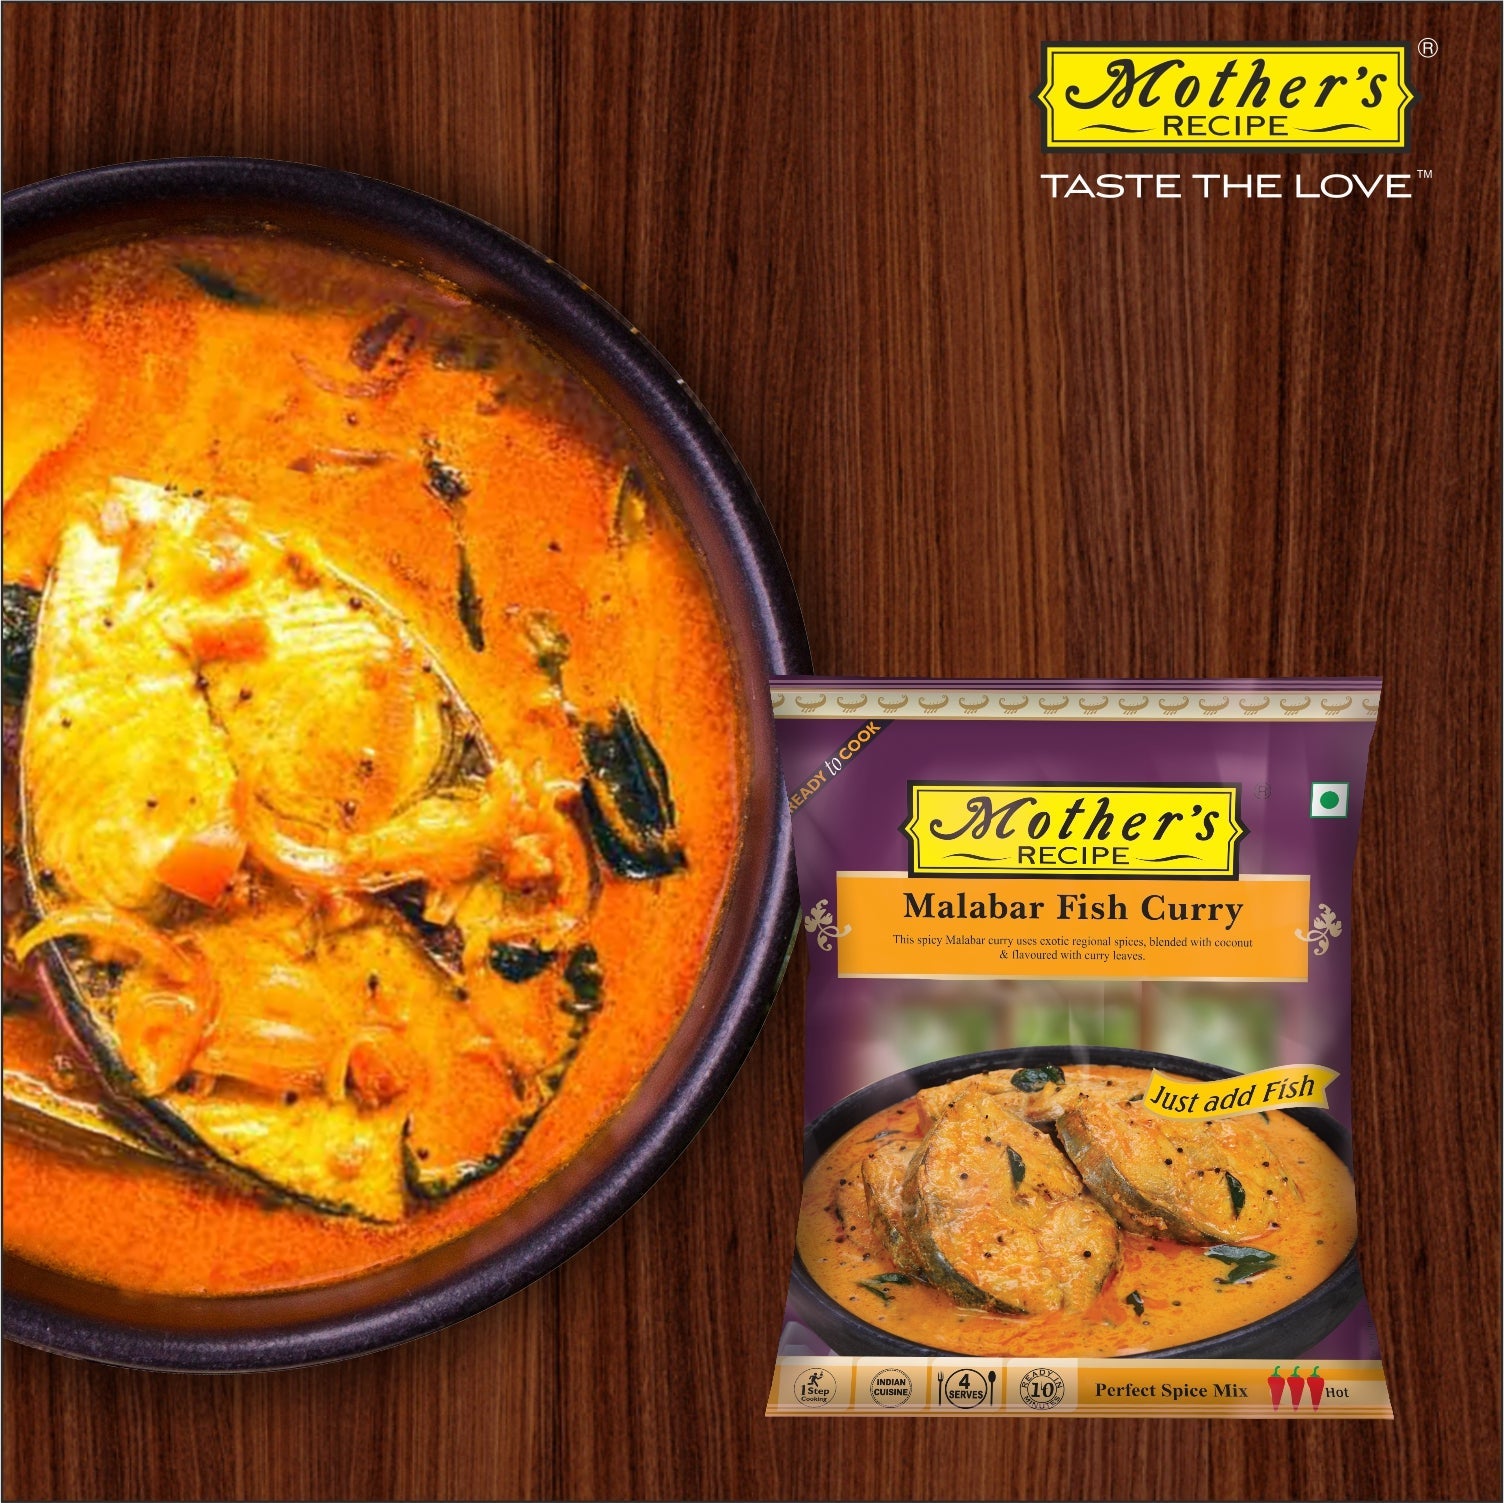 MALABAR FISH CURRY 100 GM PACK OF 6